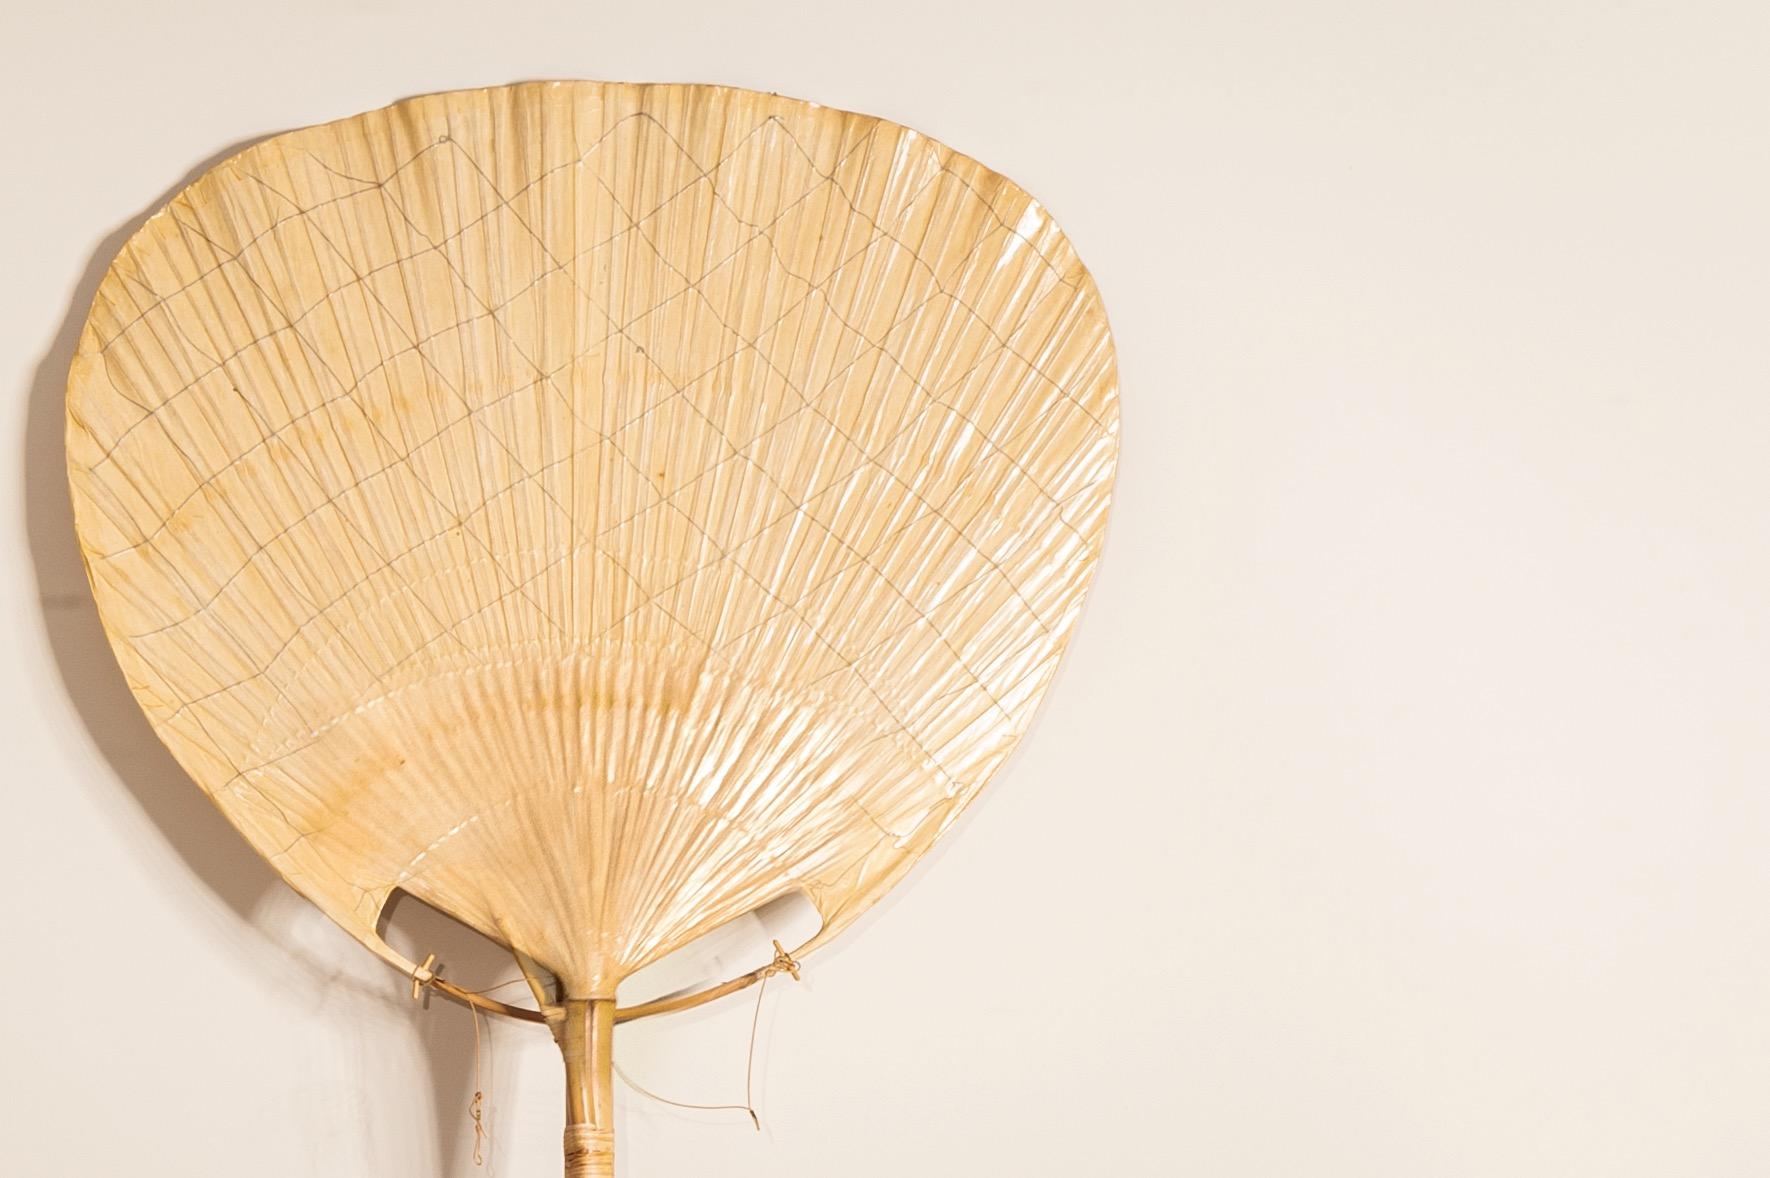 Bamboo An ‘Uchiwa’ Floor Lamp by Ingo Maurer for M Design - Germany, 1977